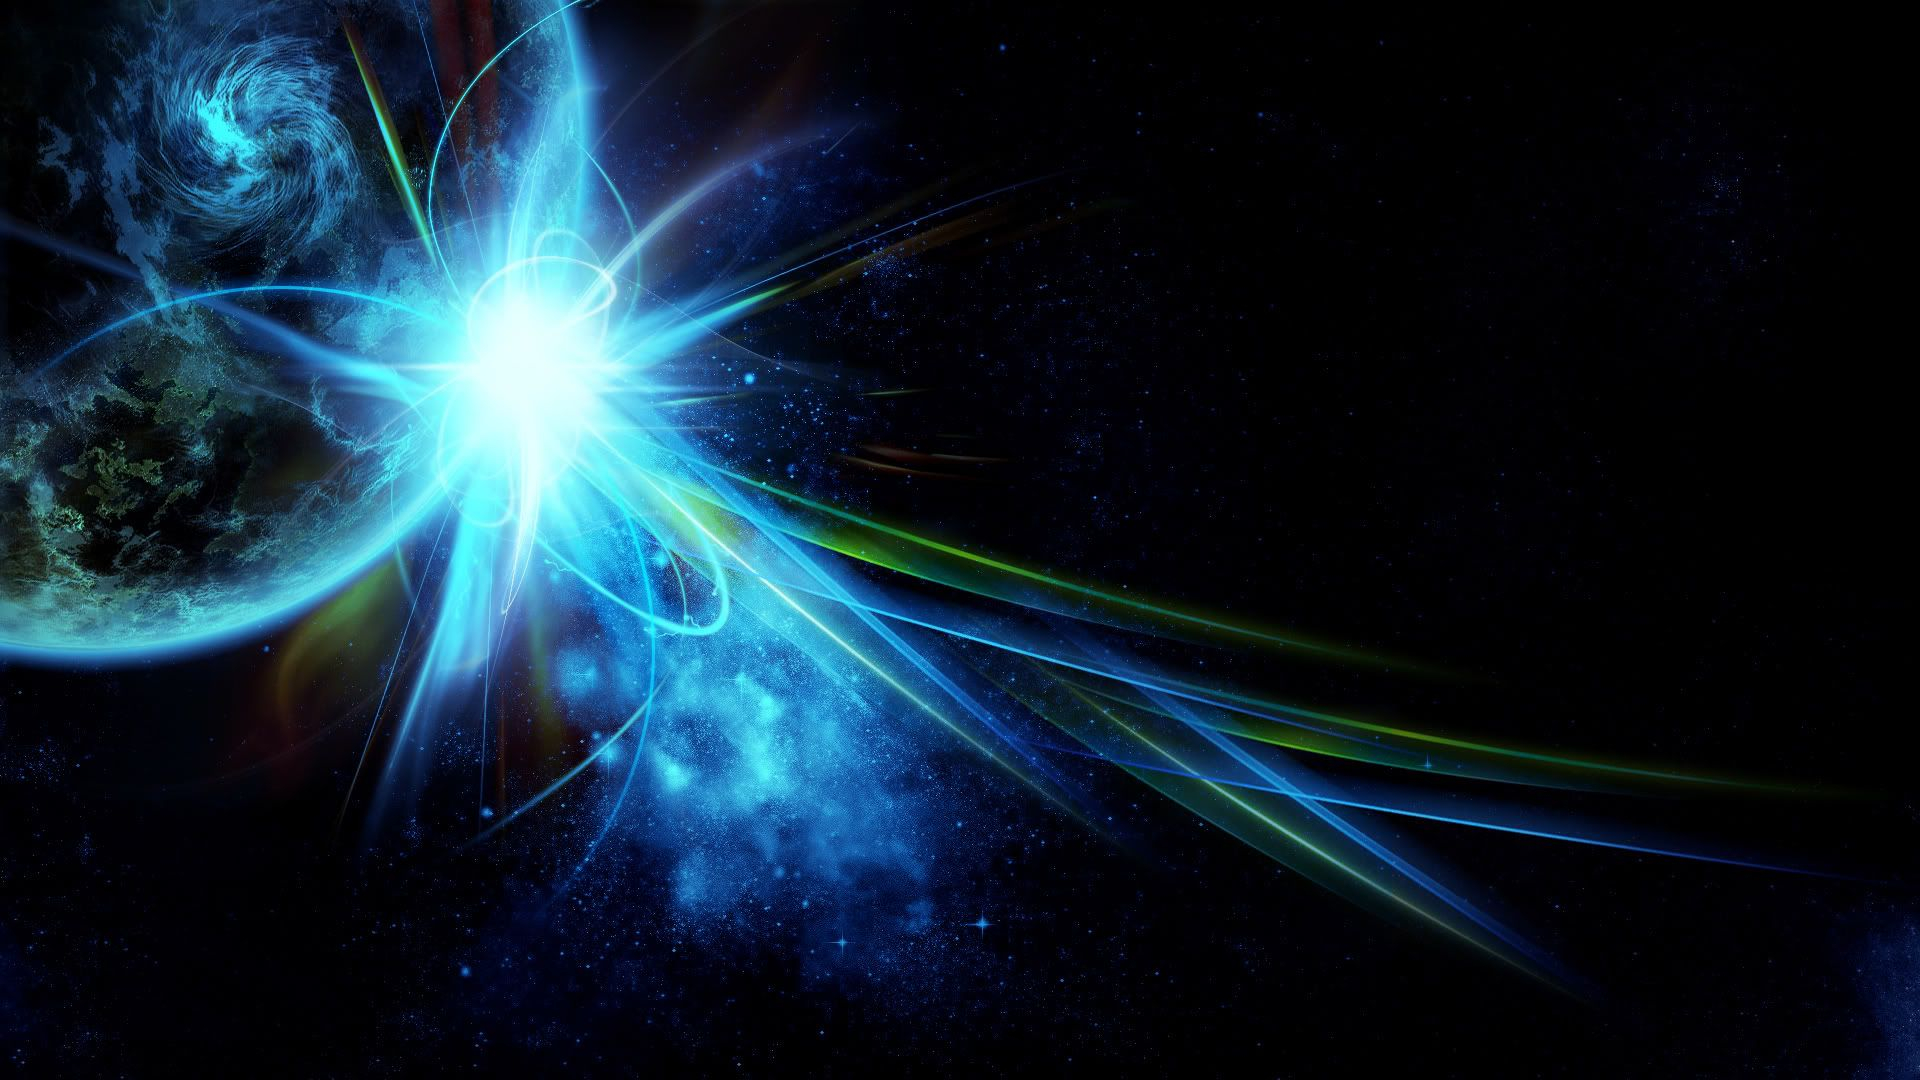 1920x1080 Quantum | Space fantasy, Abstract wallpaper, Cool backgrounds wallpapers